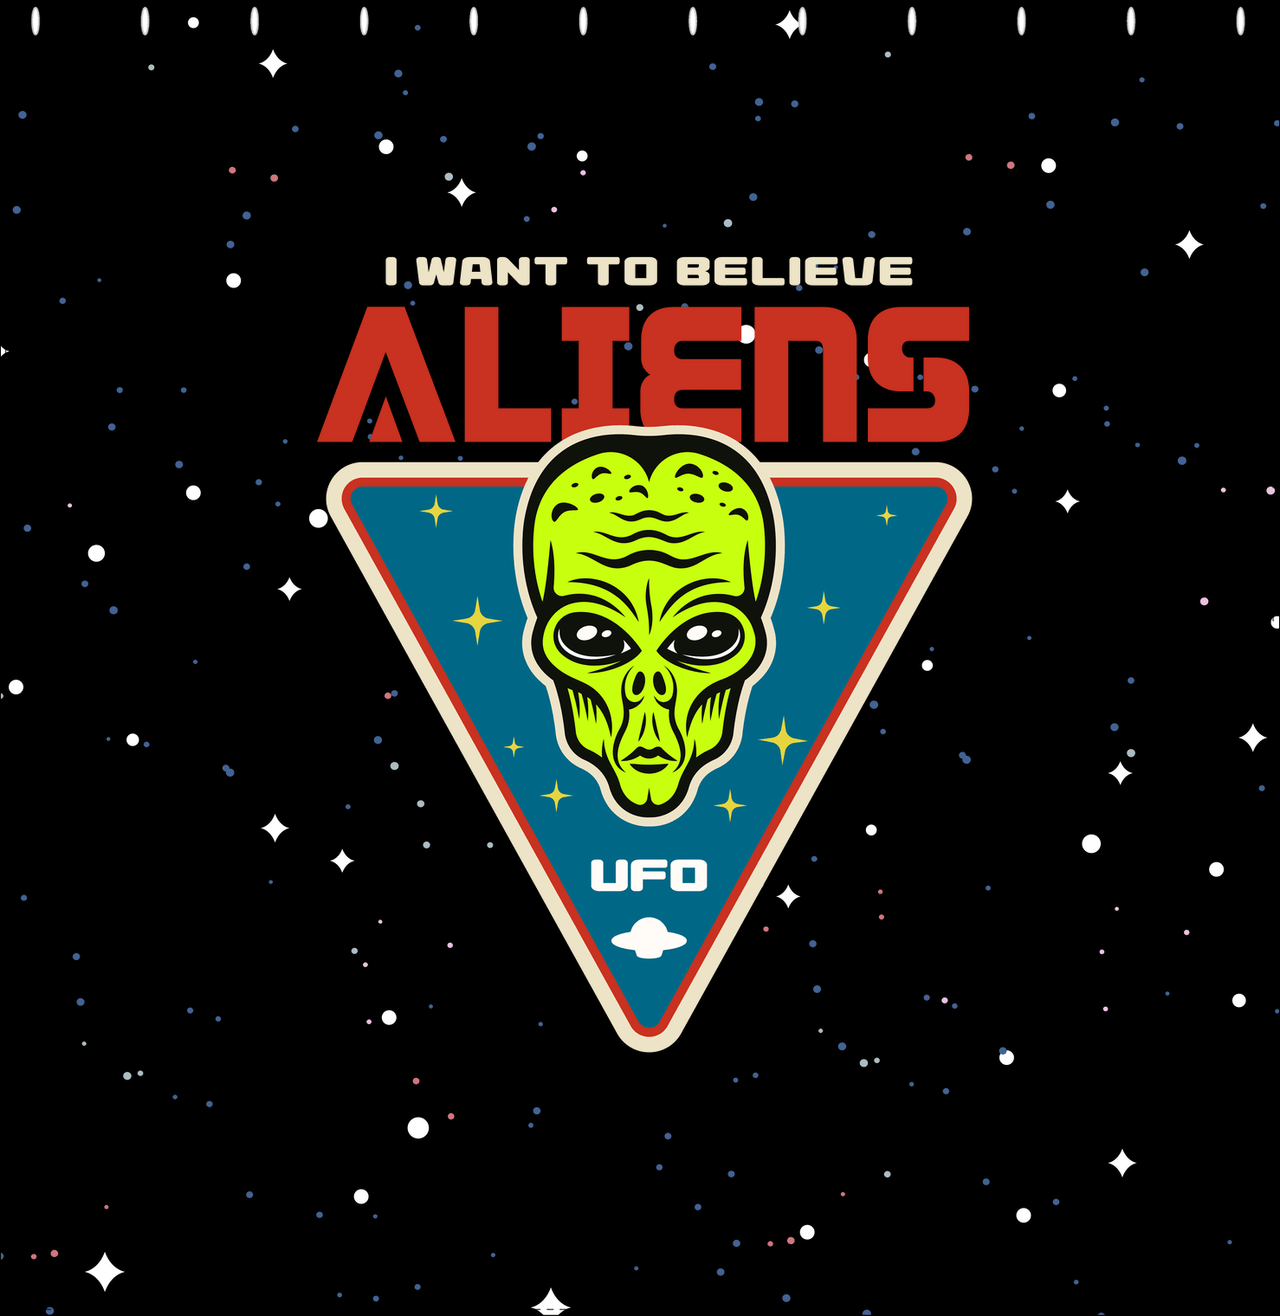 Aliens / UFO Shower Curtain - I Want To Believe - Decorate View